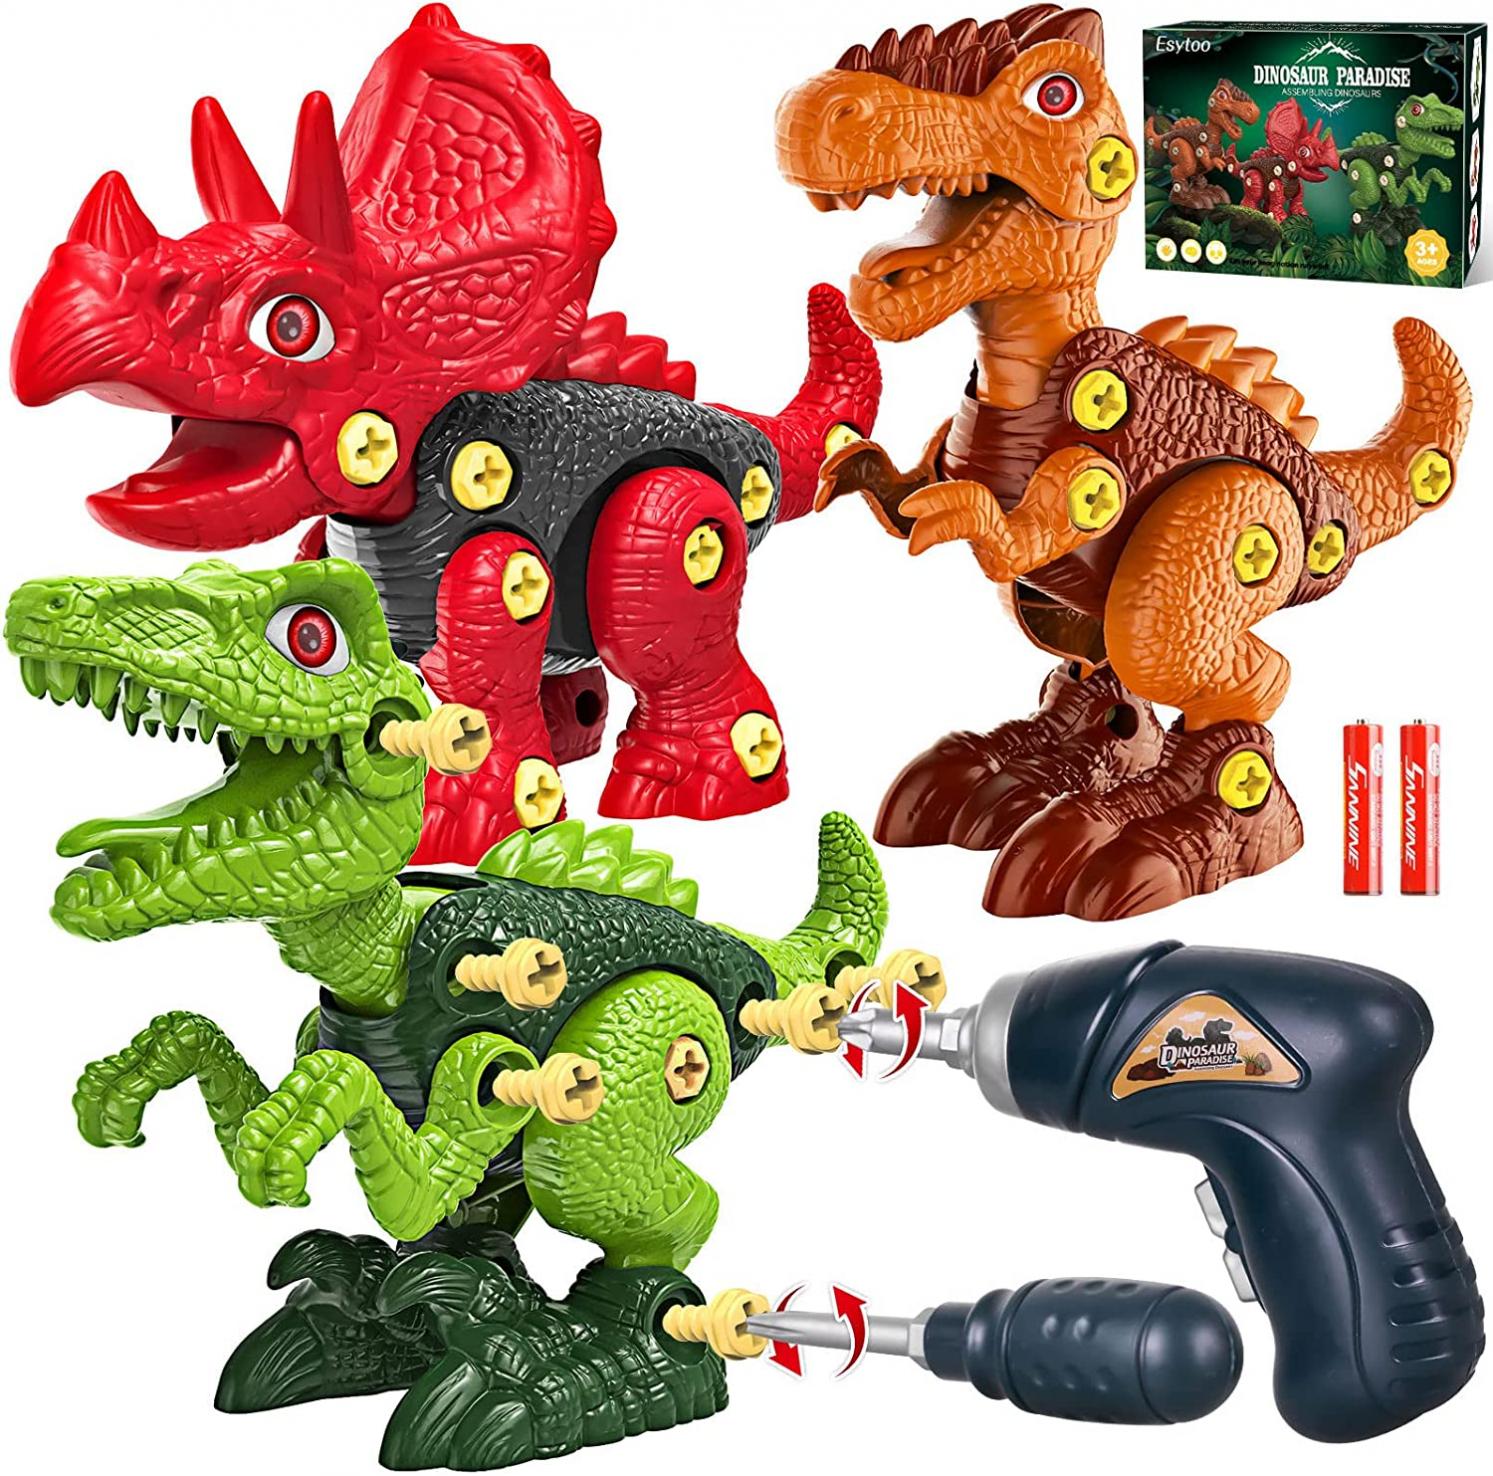 UEBZFOCS Take Apart Dinosaur Toys for Kid 3 4 5 6 7 8 Year Old Boys Birthday Gifts,Educational Construction Dino Stem Building Toys Games Set with Dino Roar & Electric Drill for Kids Ages 4-8